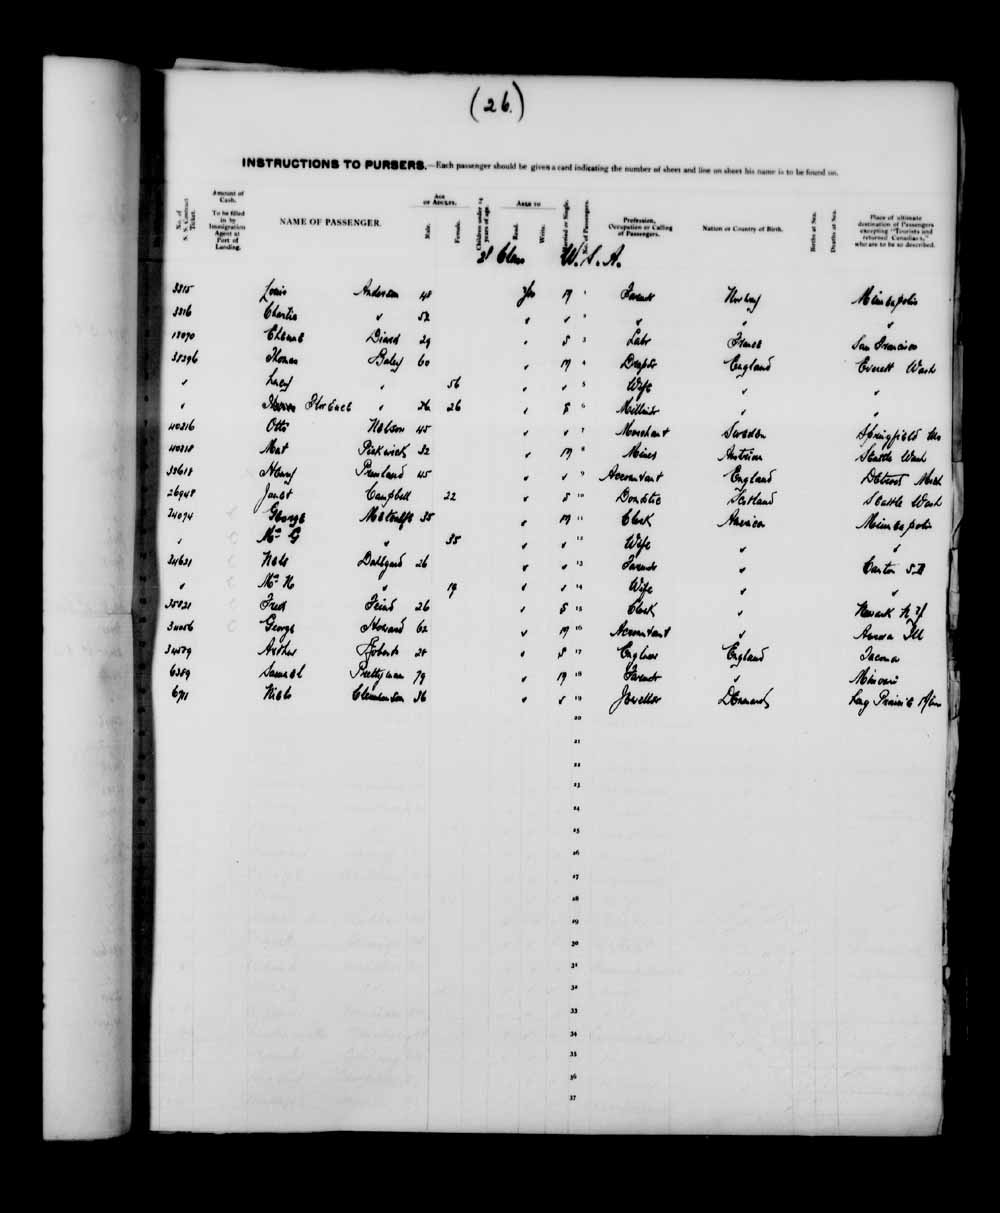 Digitized page of Quebec Passenger Lists for Image No.: e003591277